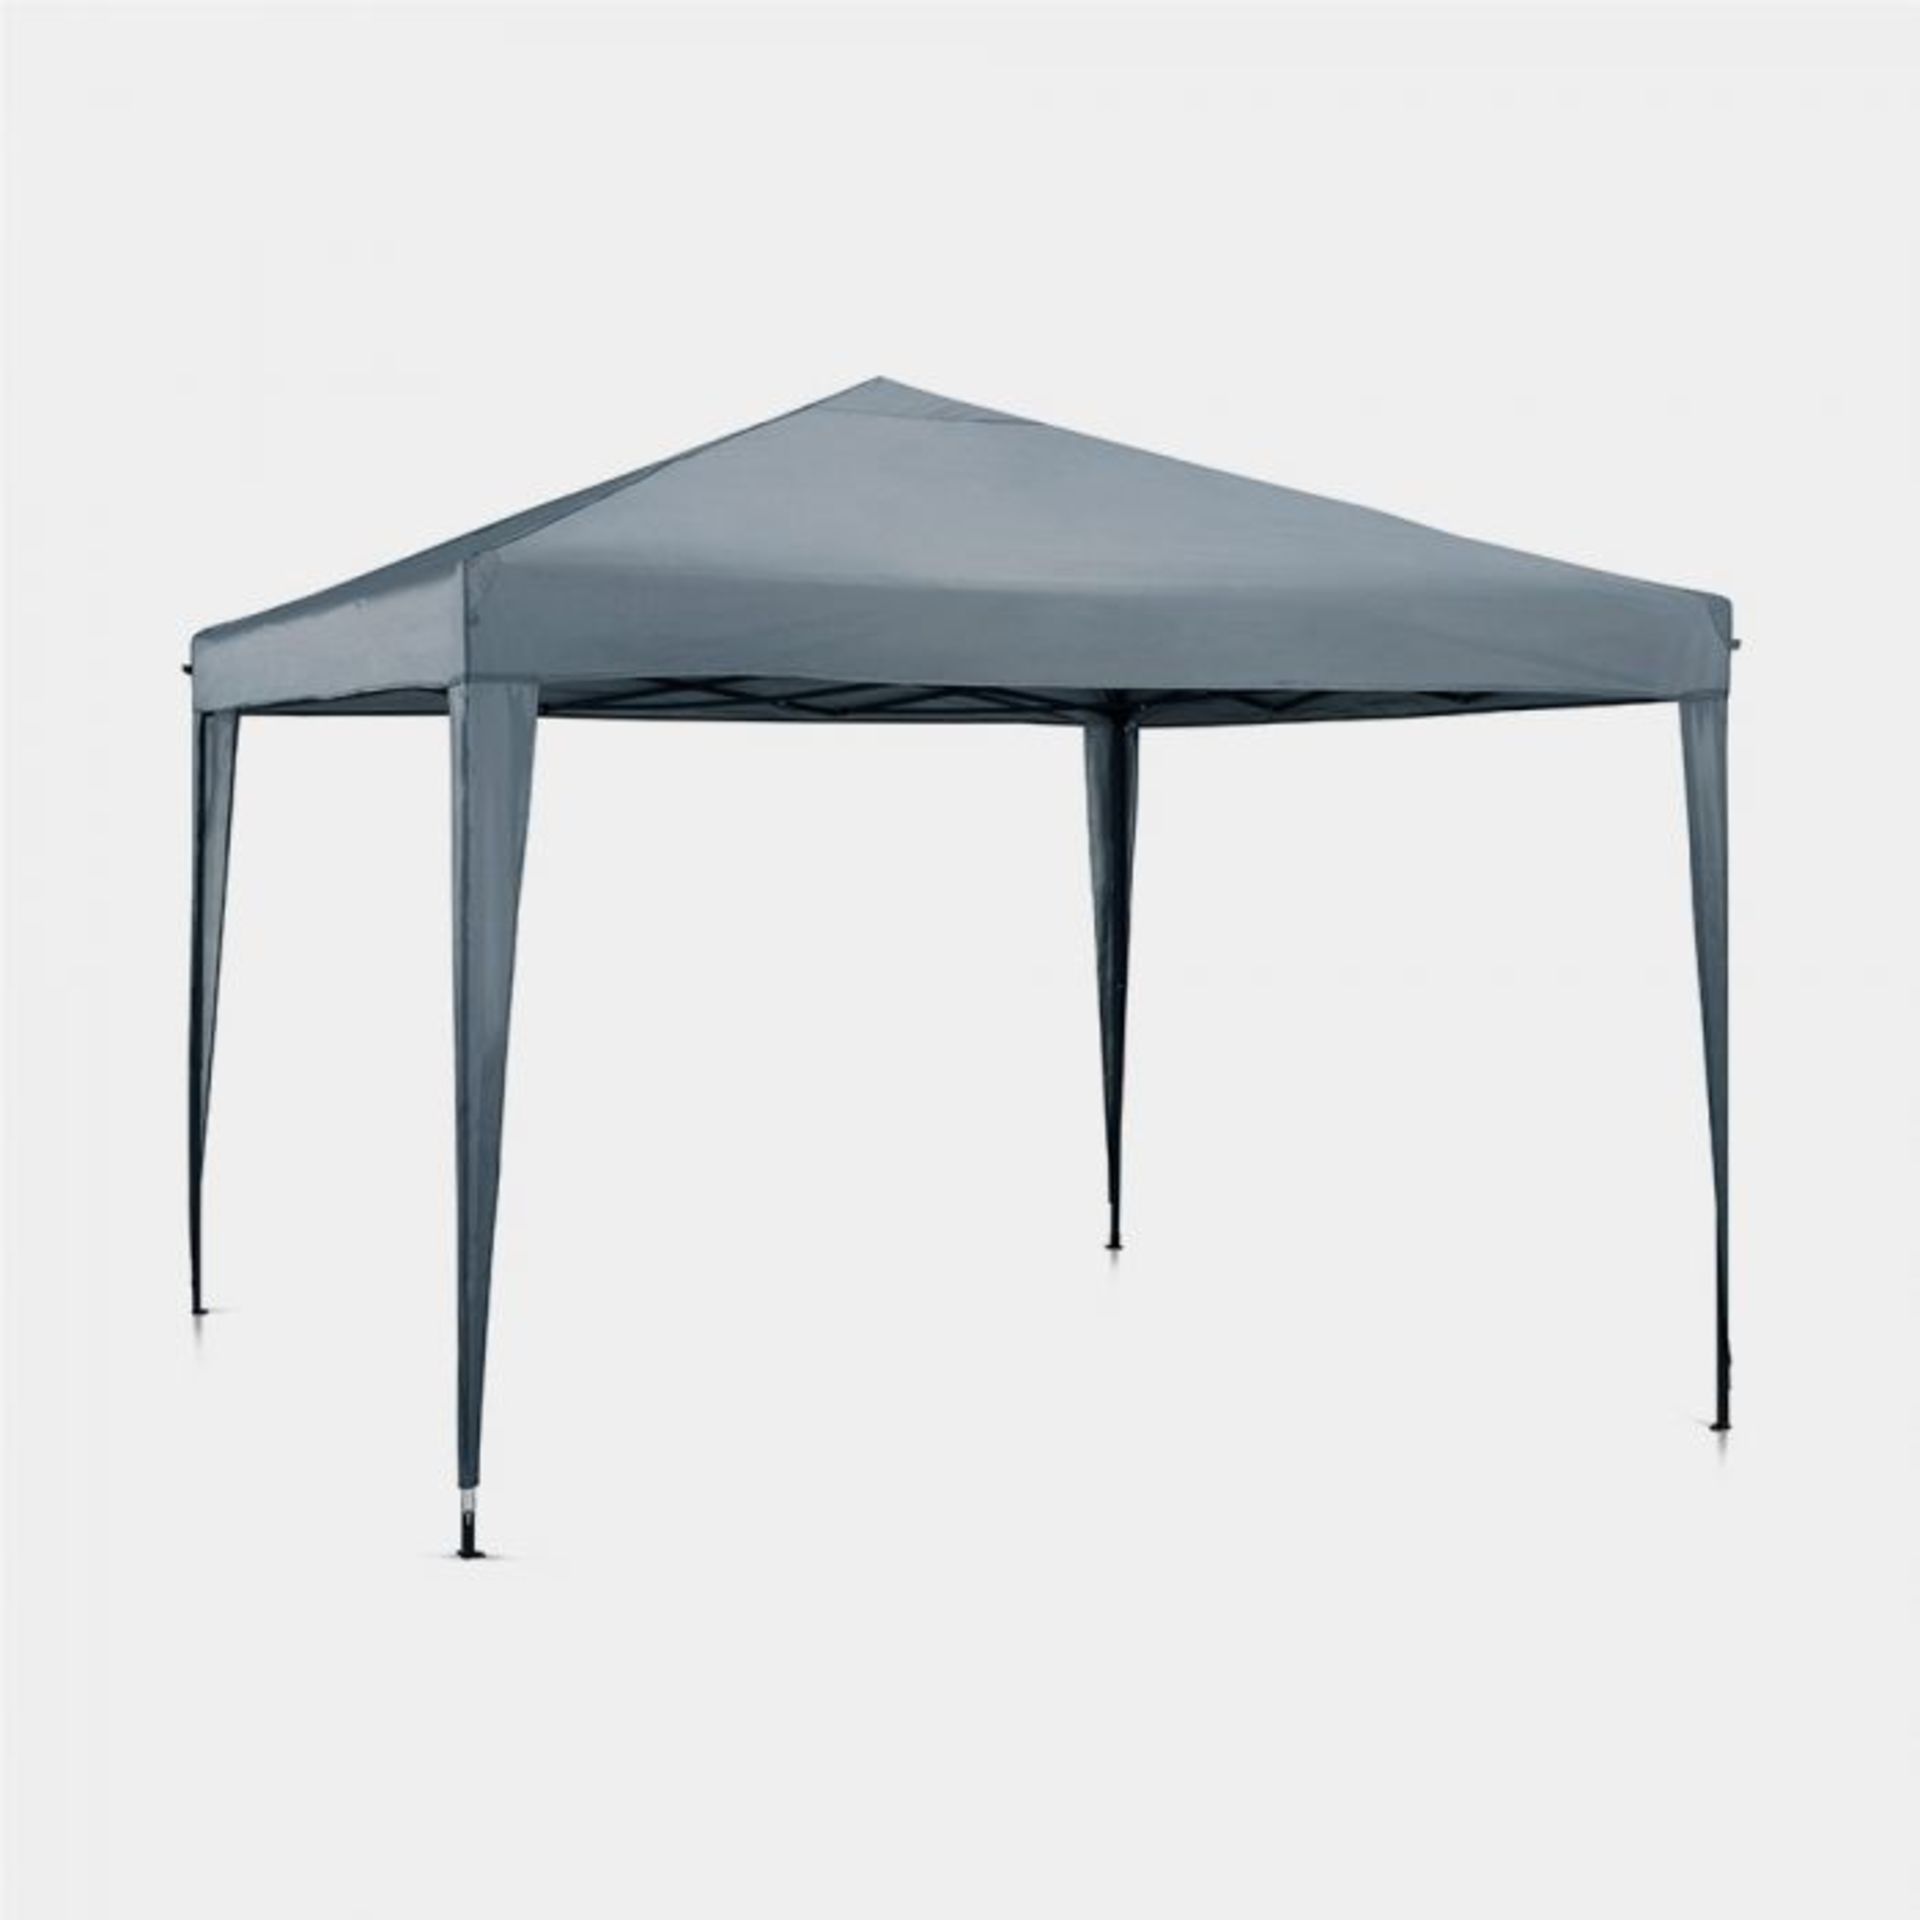 Grey 3m x 3m Pop-Up Gazebo - 2.5m Max roof height. Available in slate grey, the easy-to-assemble